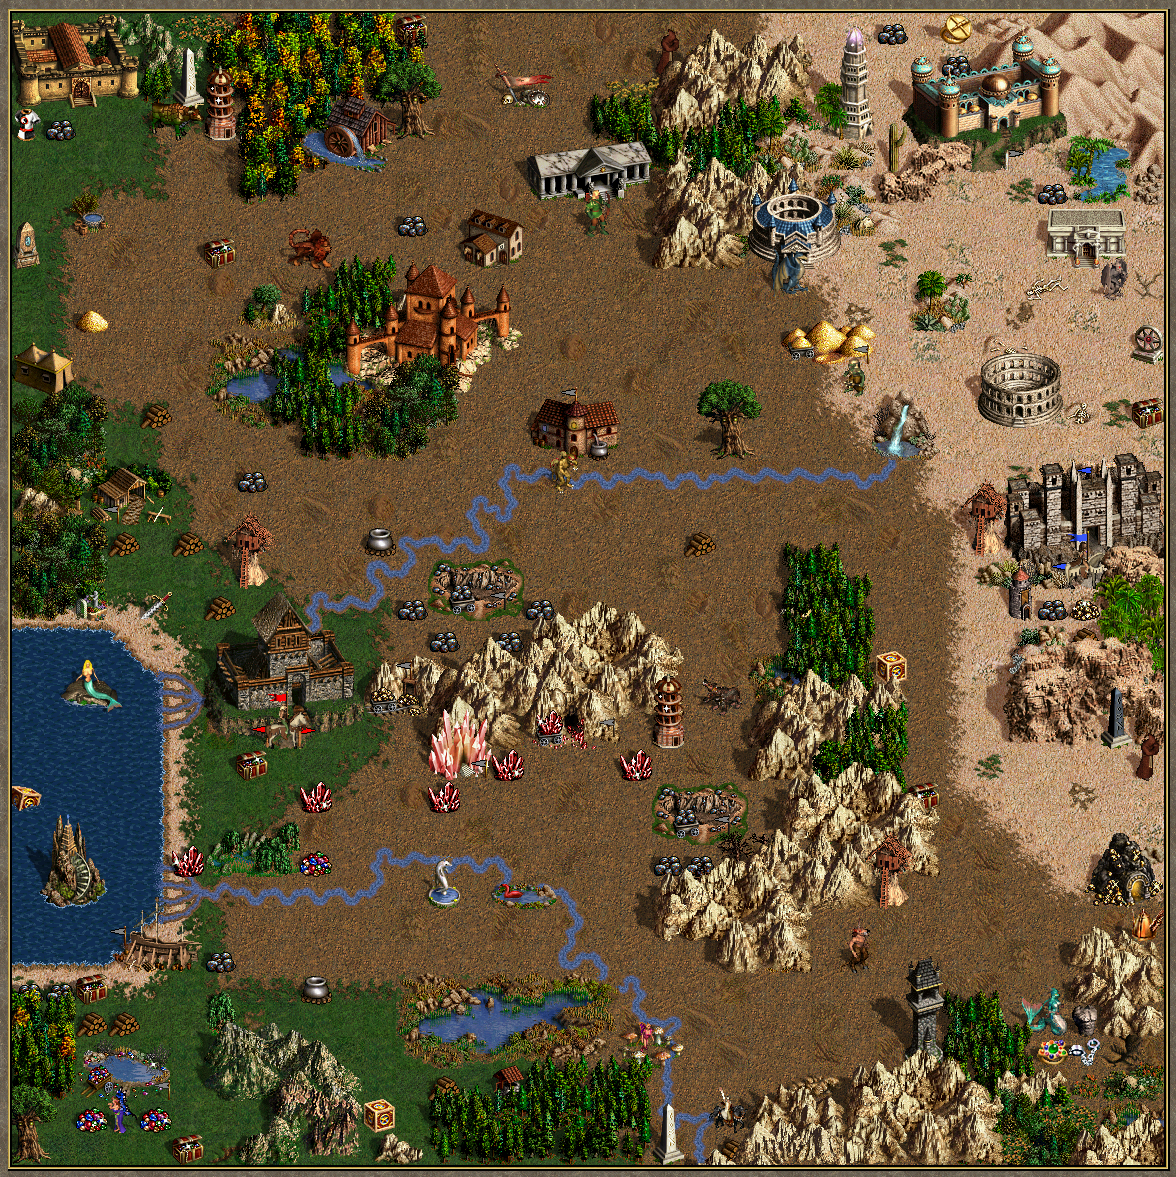 Heroes of might and magic 3 карты. Герои 3. Герои 3 1999. HOMM 3 карта. Heroes of might and Magic 3.